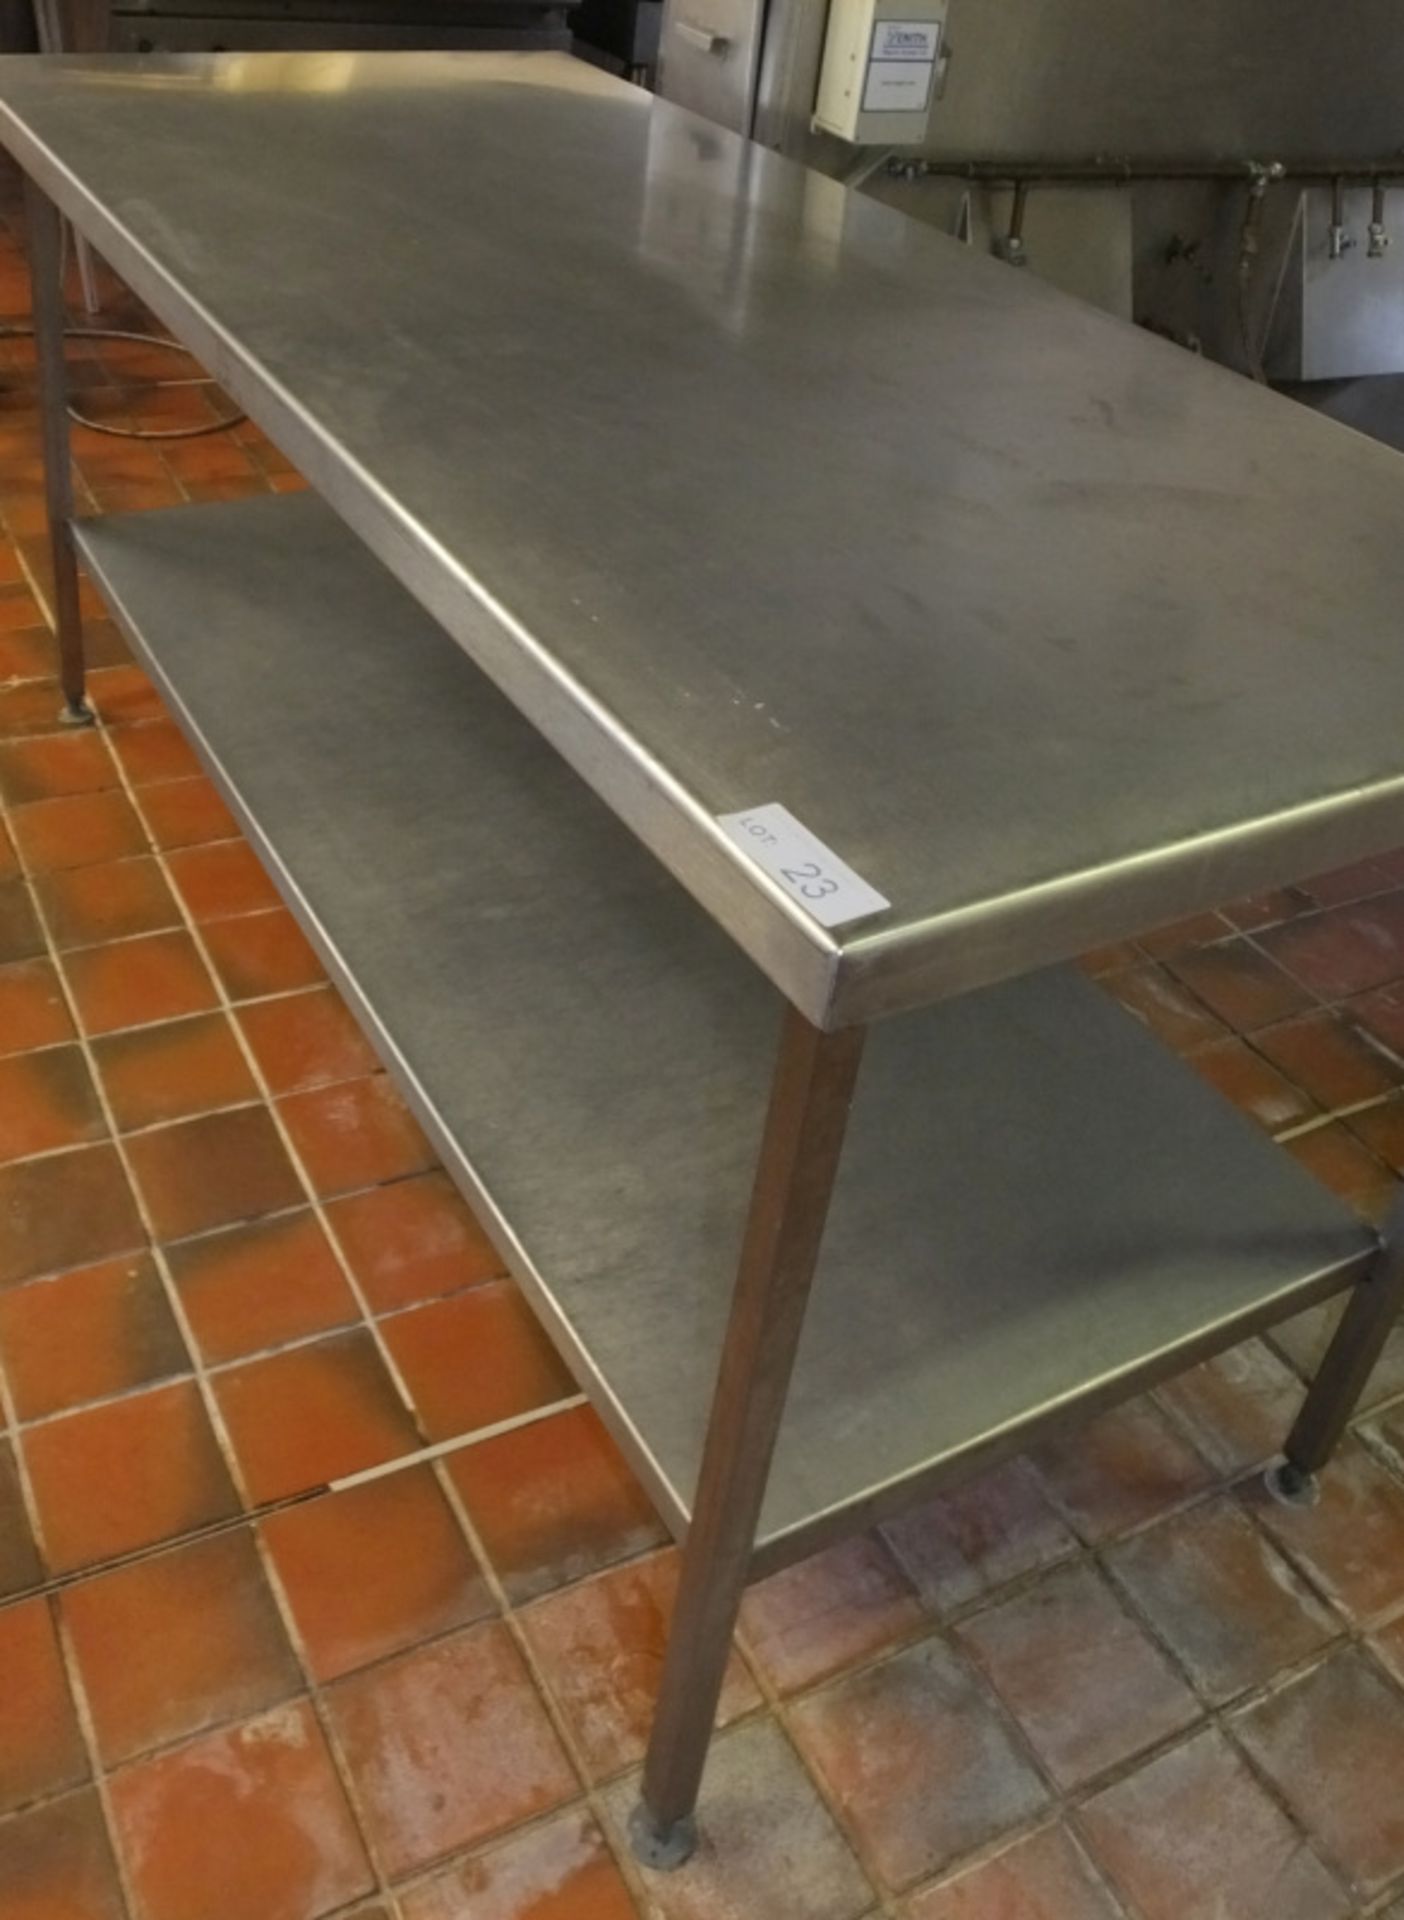 Stainless Steel Prep Table - L1800 x D800 x H890mm - Image 2 of 3